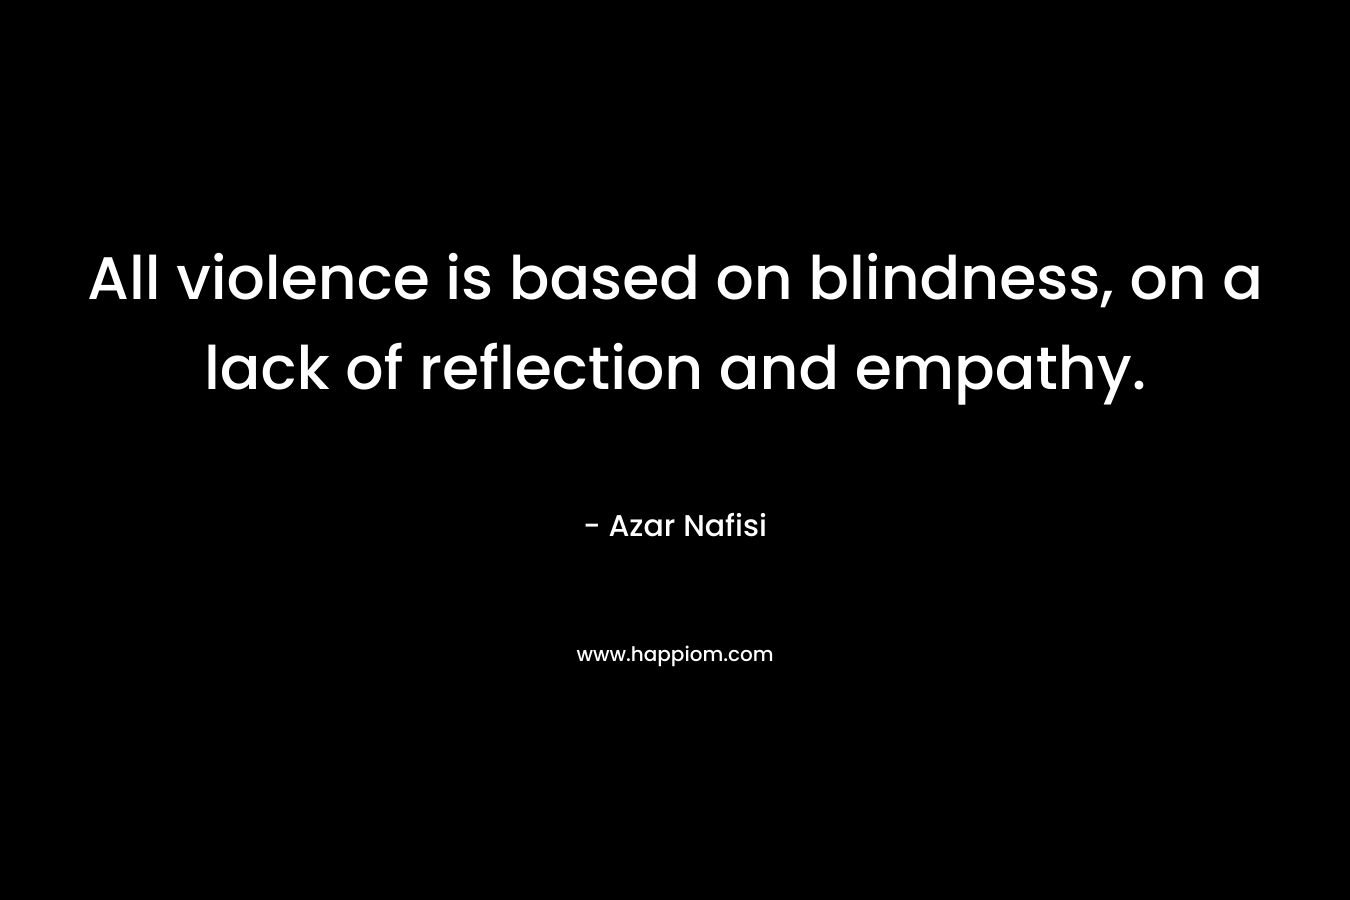 All violence is based on blindness, on a lack of reflection and empathy. – Azar Nafisi